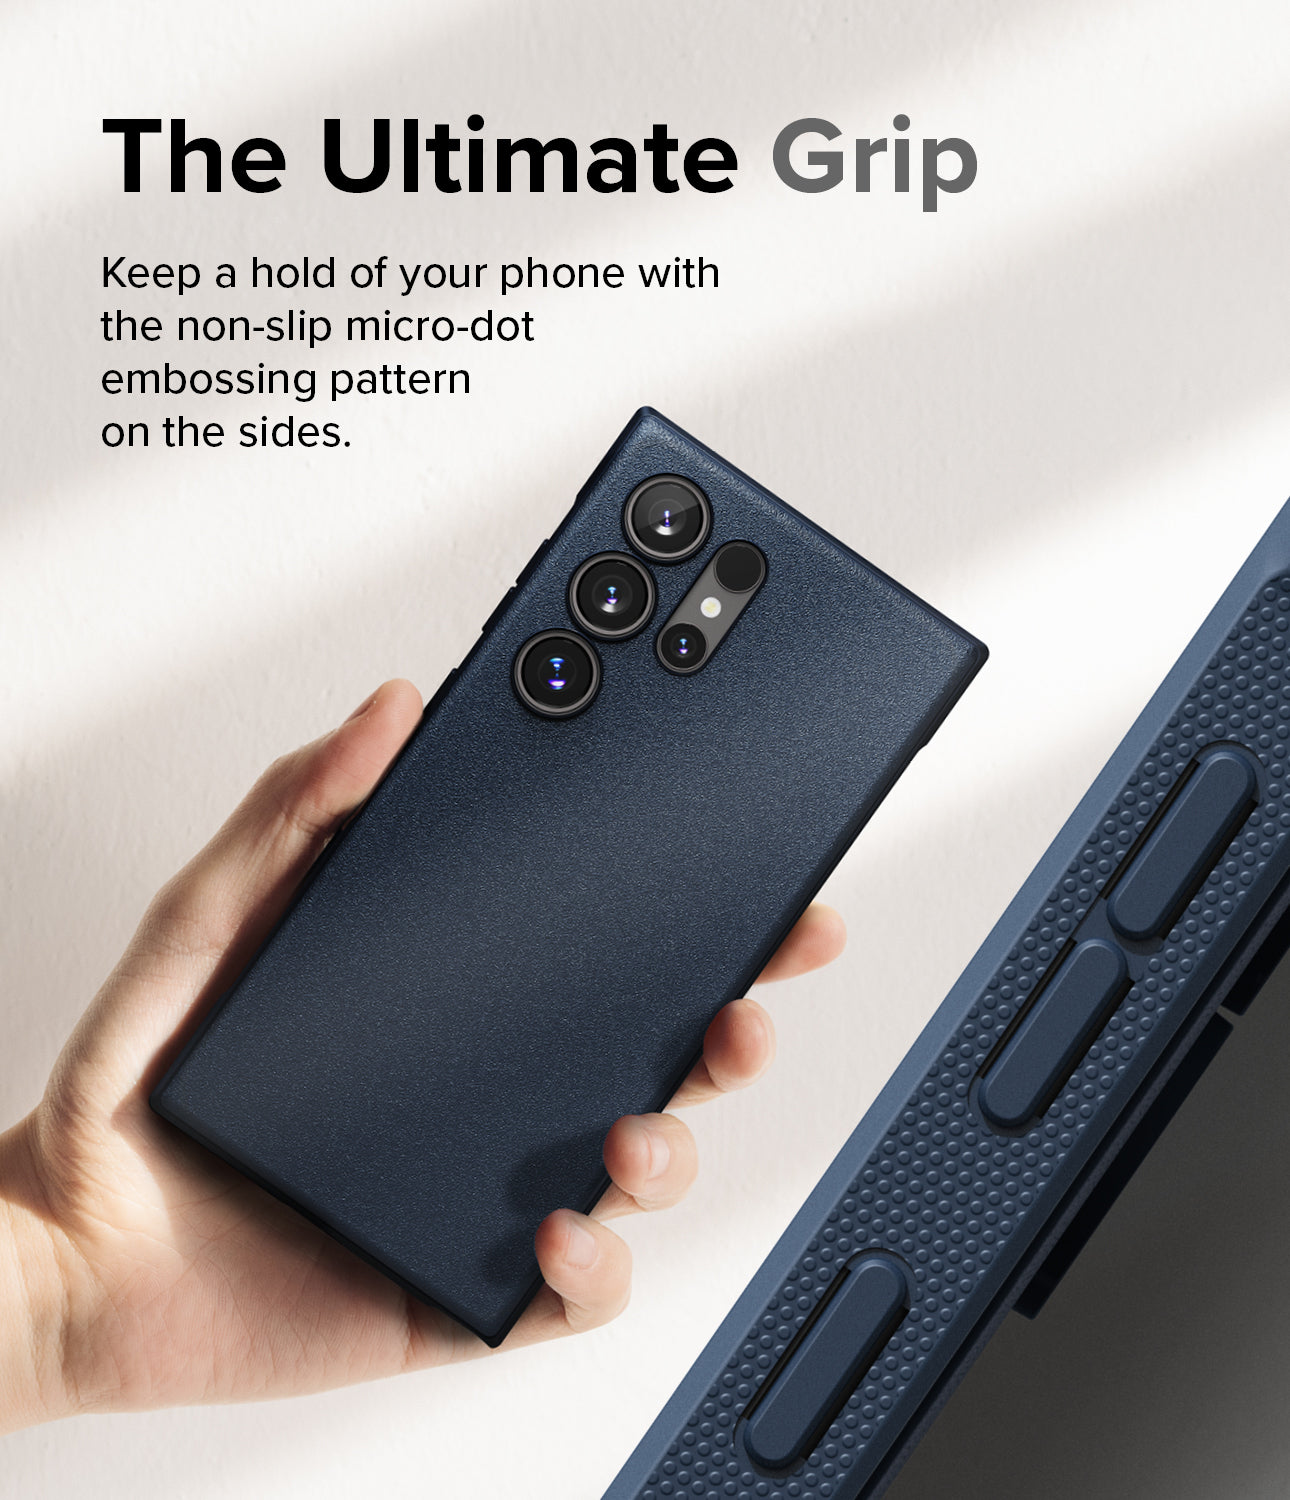 Galaxy S24 Ultra Case | Onyx - NavyGalaxy S24 Ultra Case | Onyx - Navy - The Ultimate Grip. Keep a hold of your phone with the non-slip micro-dot embossing pattern on the sides.